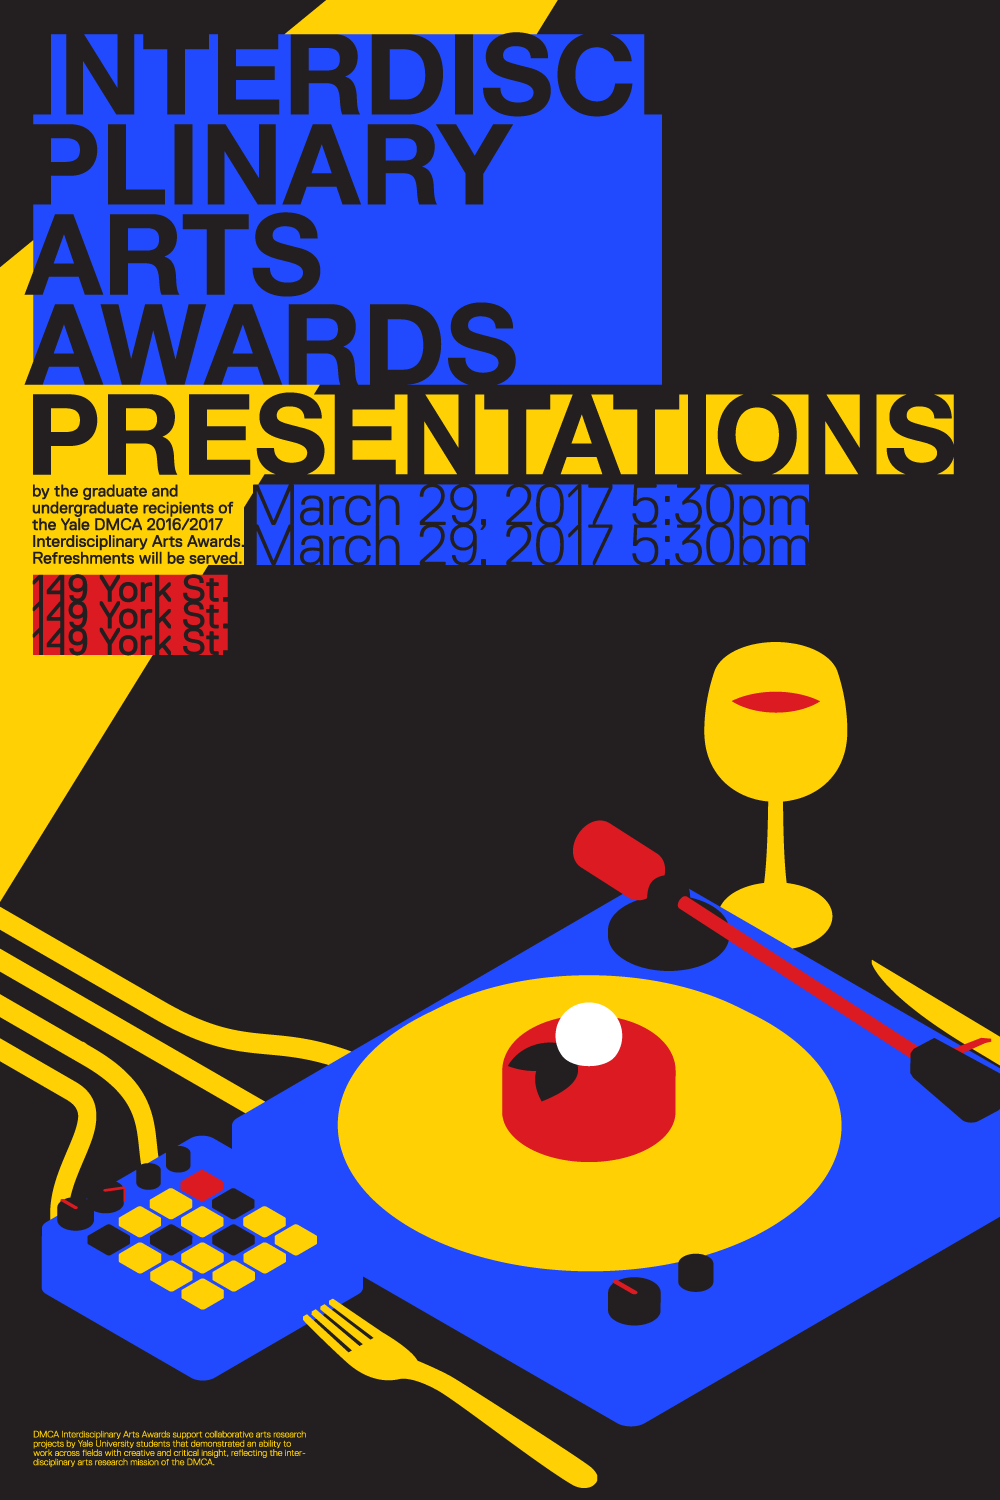 Interdisciplinary Arts Awards Presentation poster with a blue, red, and yellow illustration of a DJ’s turntable. On the turntable is a plate with desert. Next to it are a fork, knife, and glass of wine.